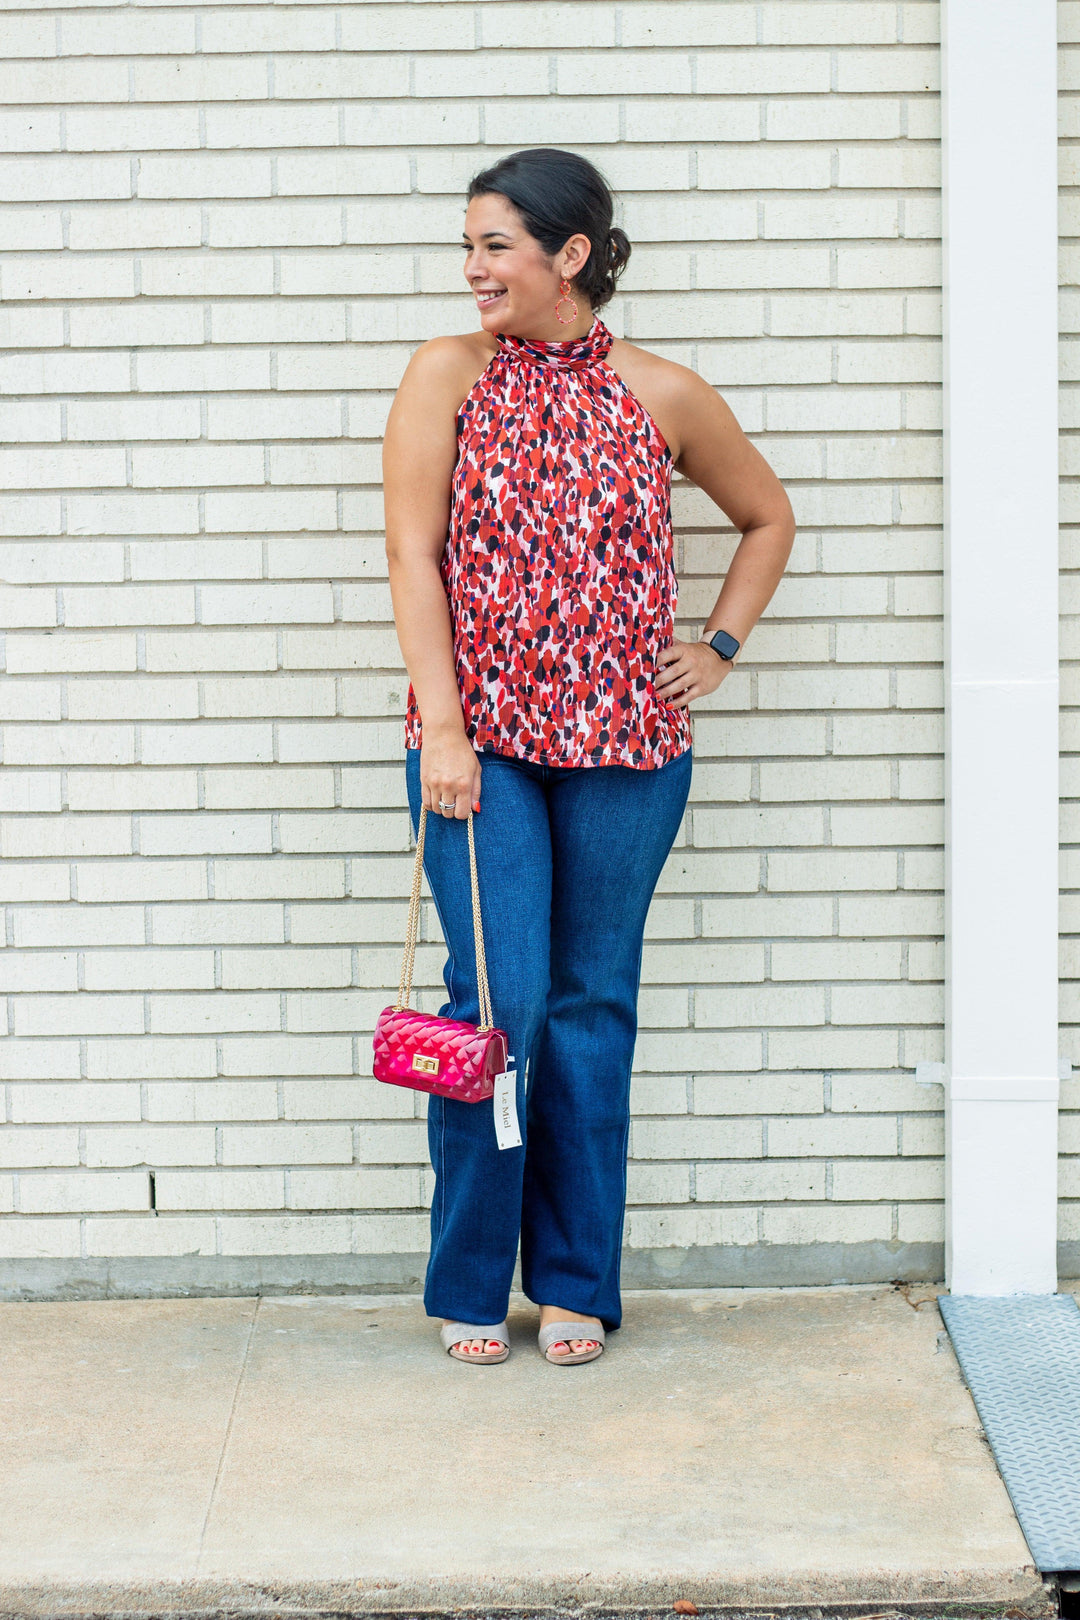 Shades of Red Halter Top - Tres Chic Houston